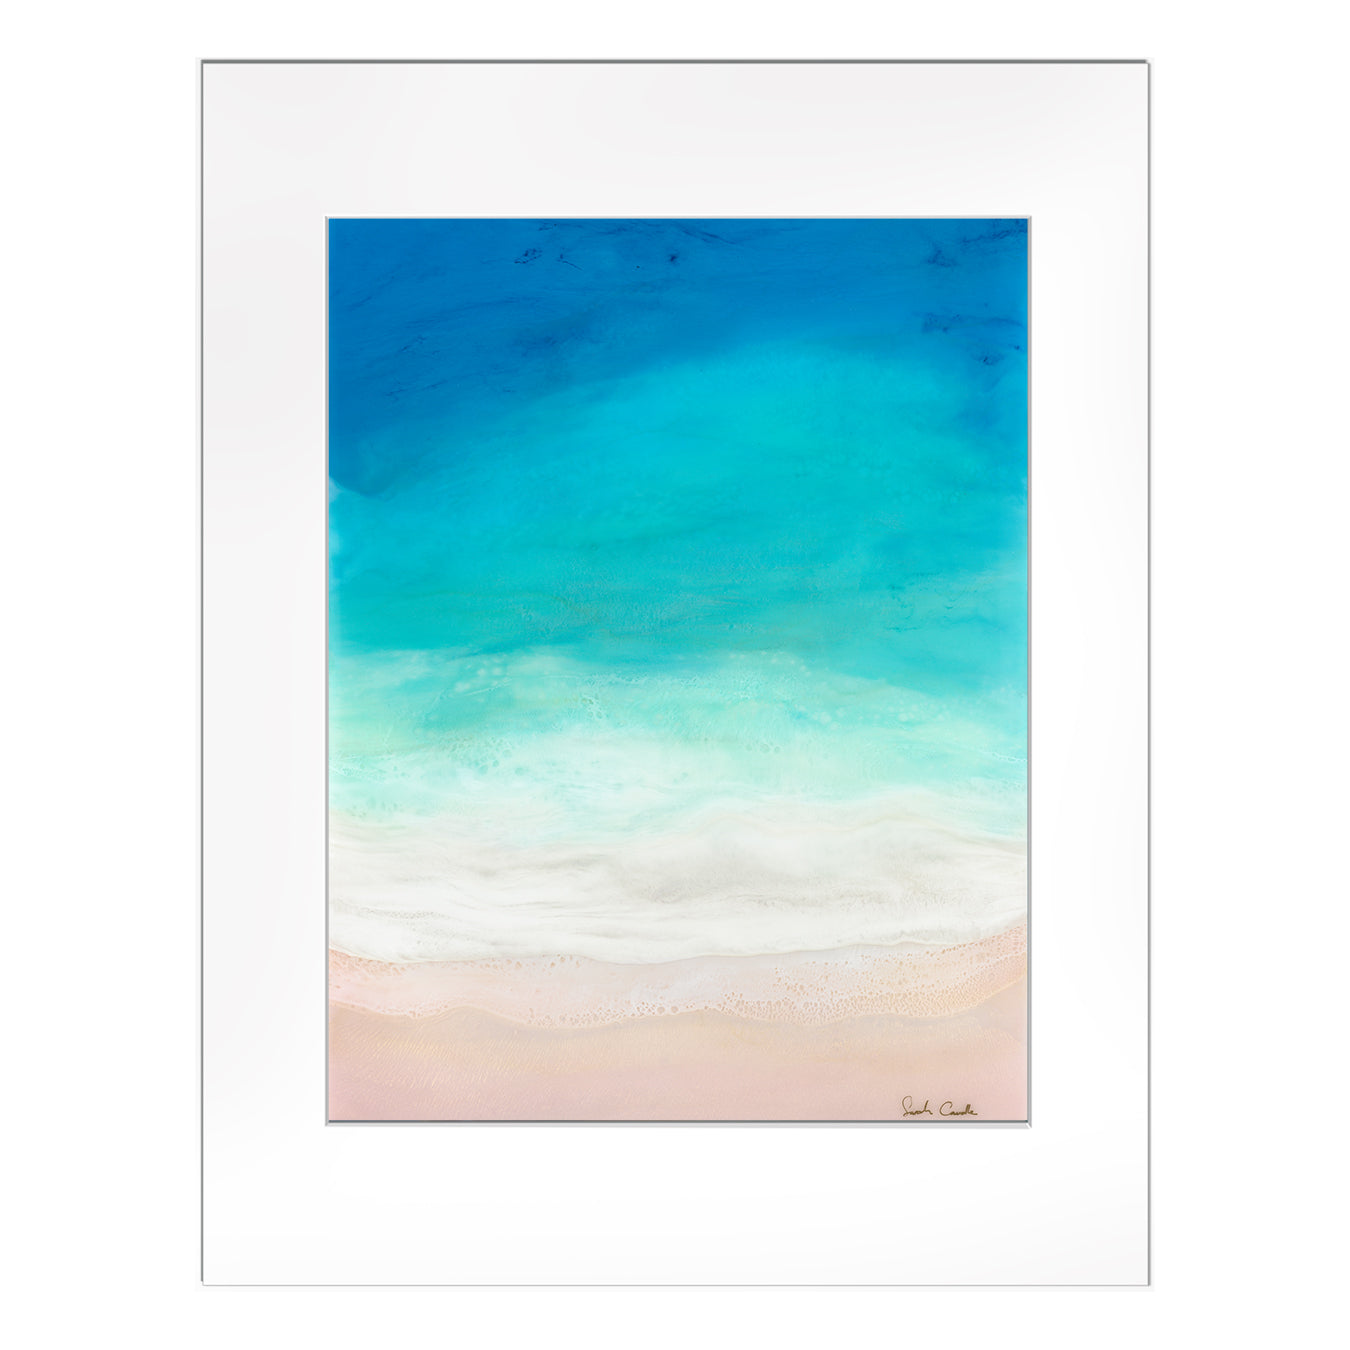 【Sarah Caudle / サラカードル】”Waves of Happiness”Matted Print 